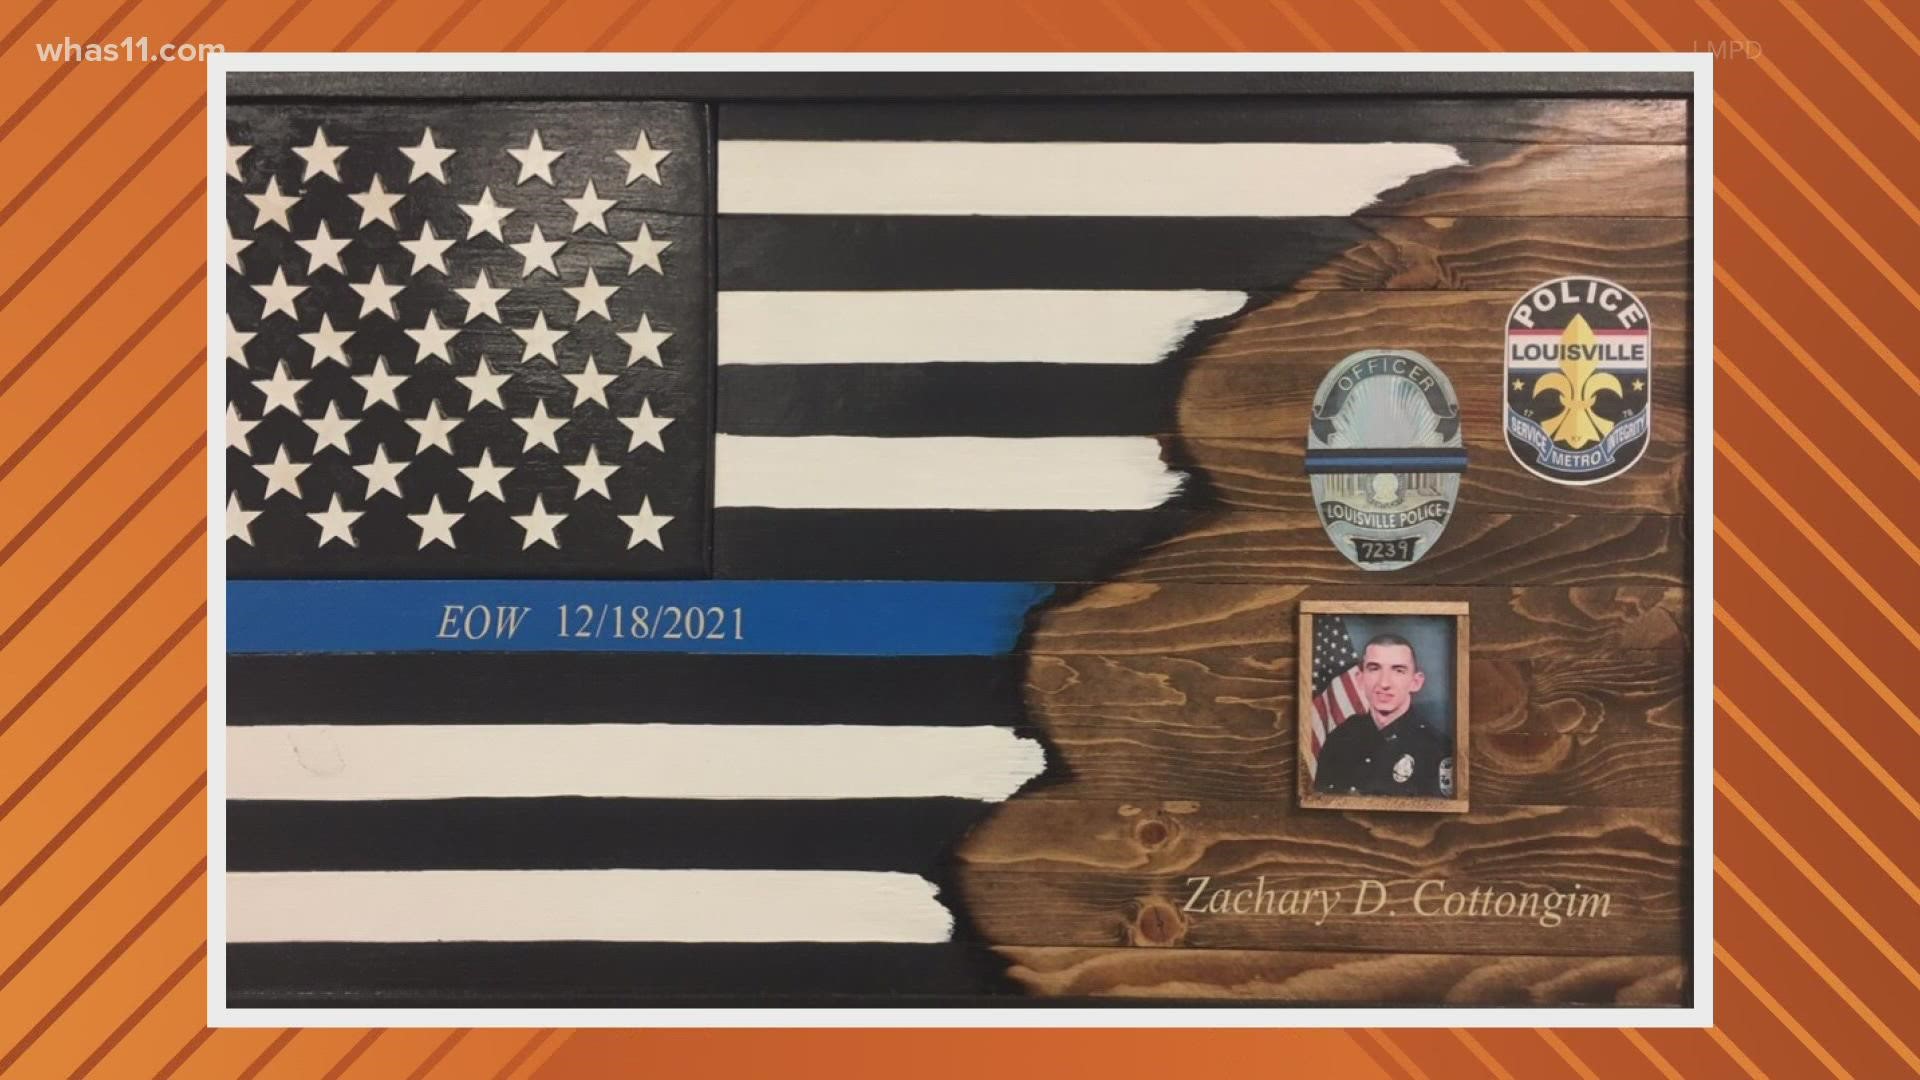 The artist told Boone County police they had no way of getting the gift to Zachary Cottongim's family, so deputies brought it to Louisville themselves.